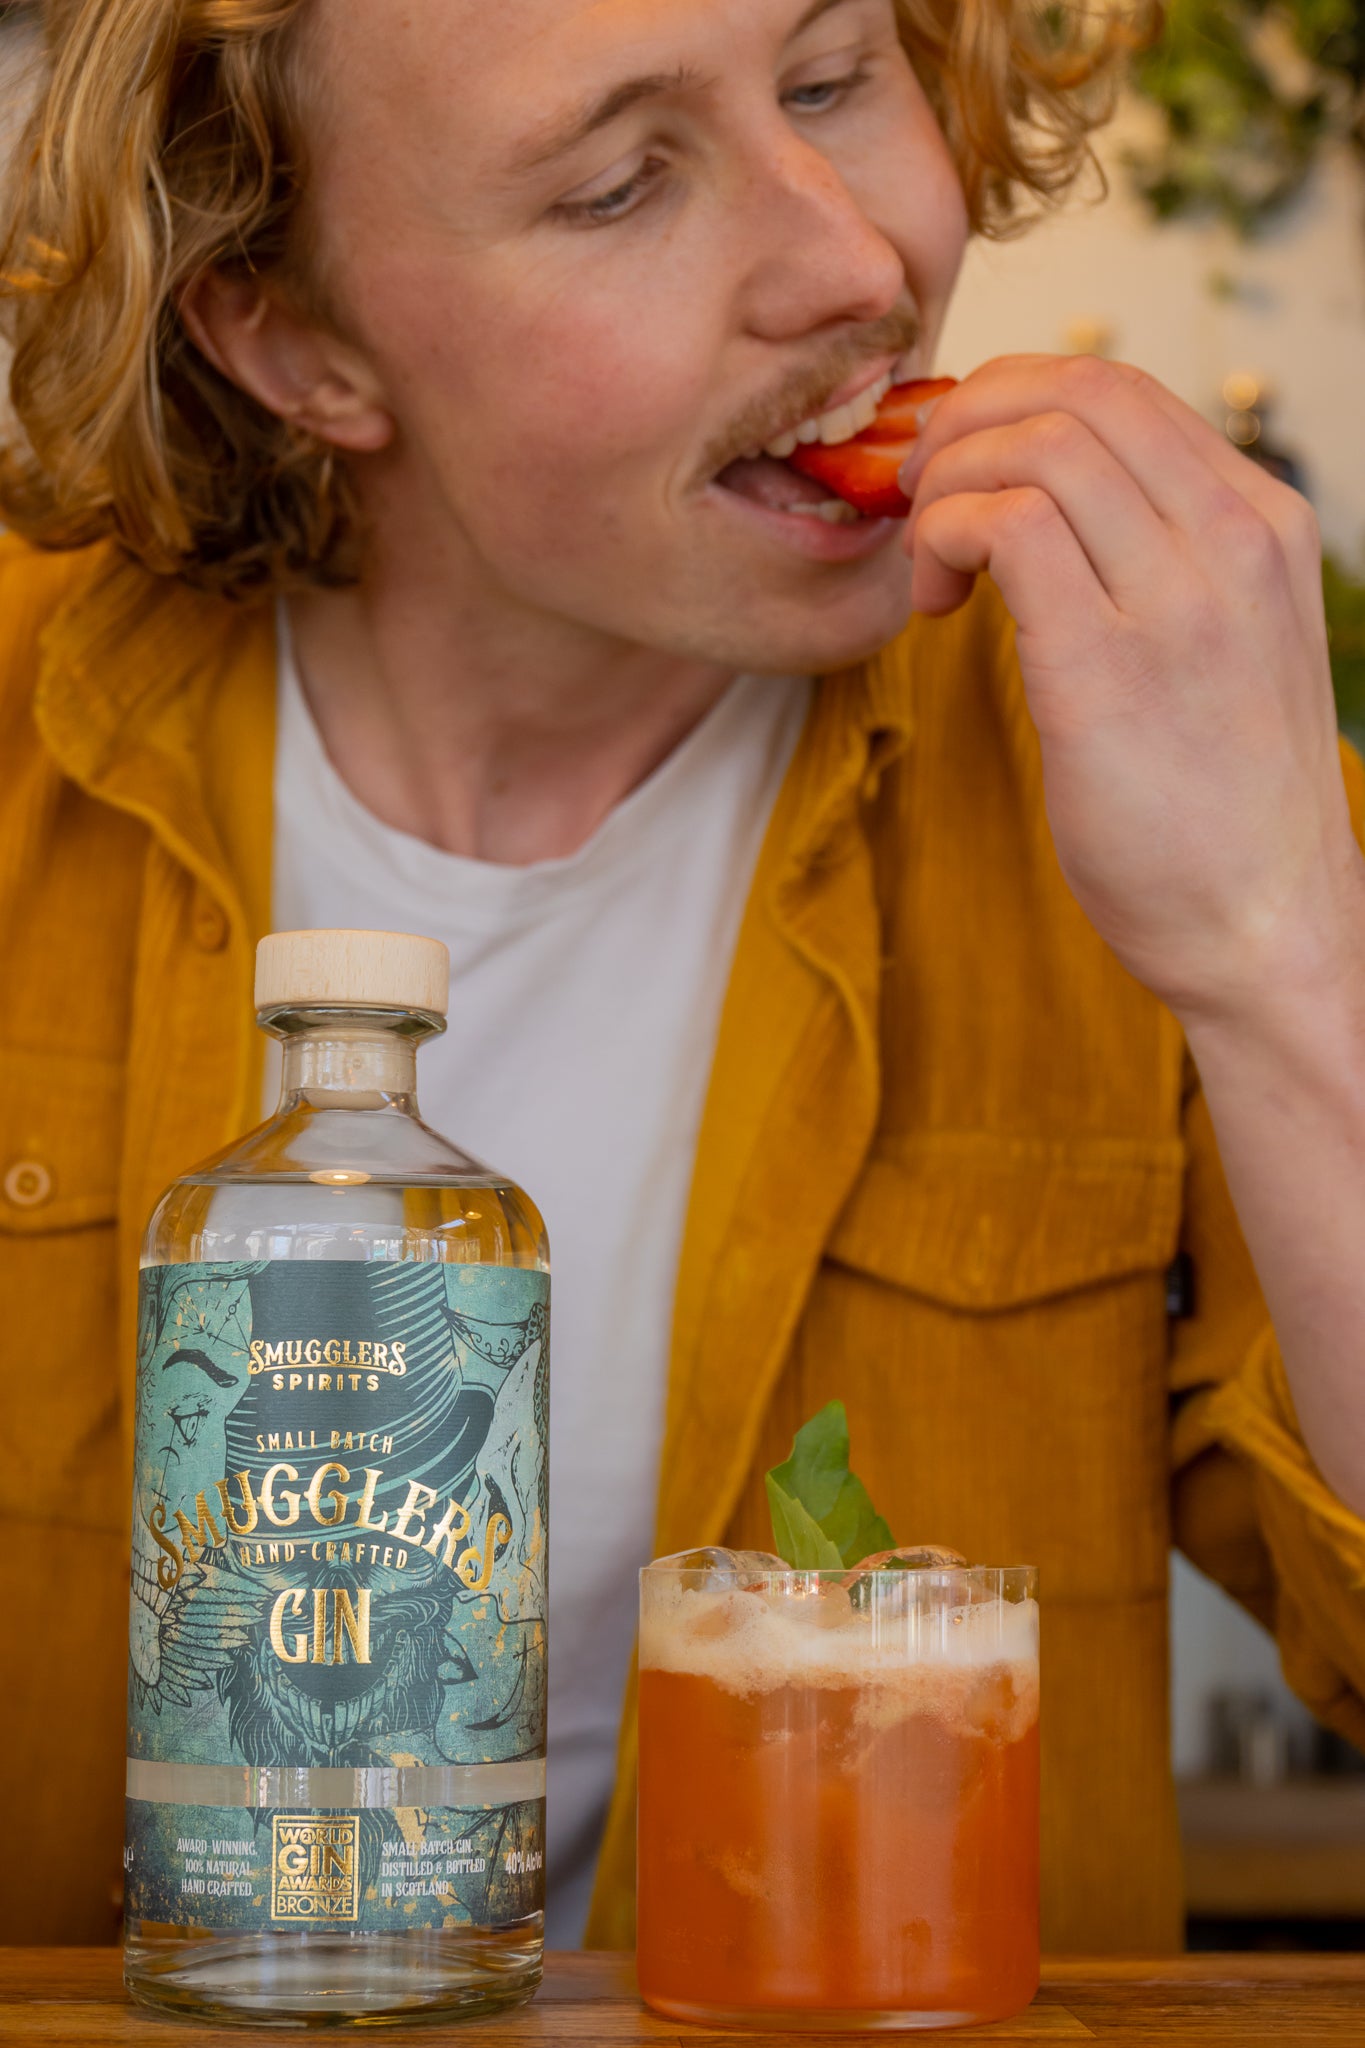 Smugglers Gin bottle next to a deep red strawberry and basil cocktail, a man bites into the strawberry garnish